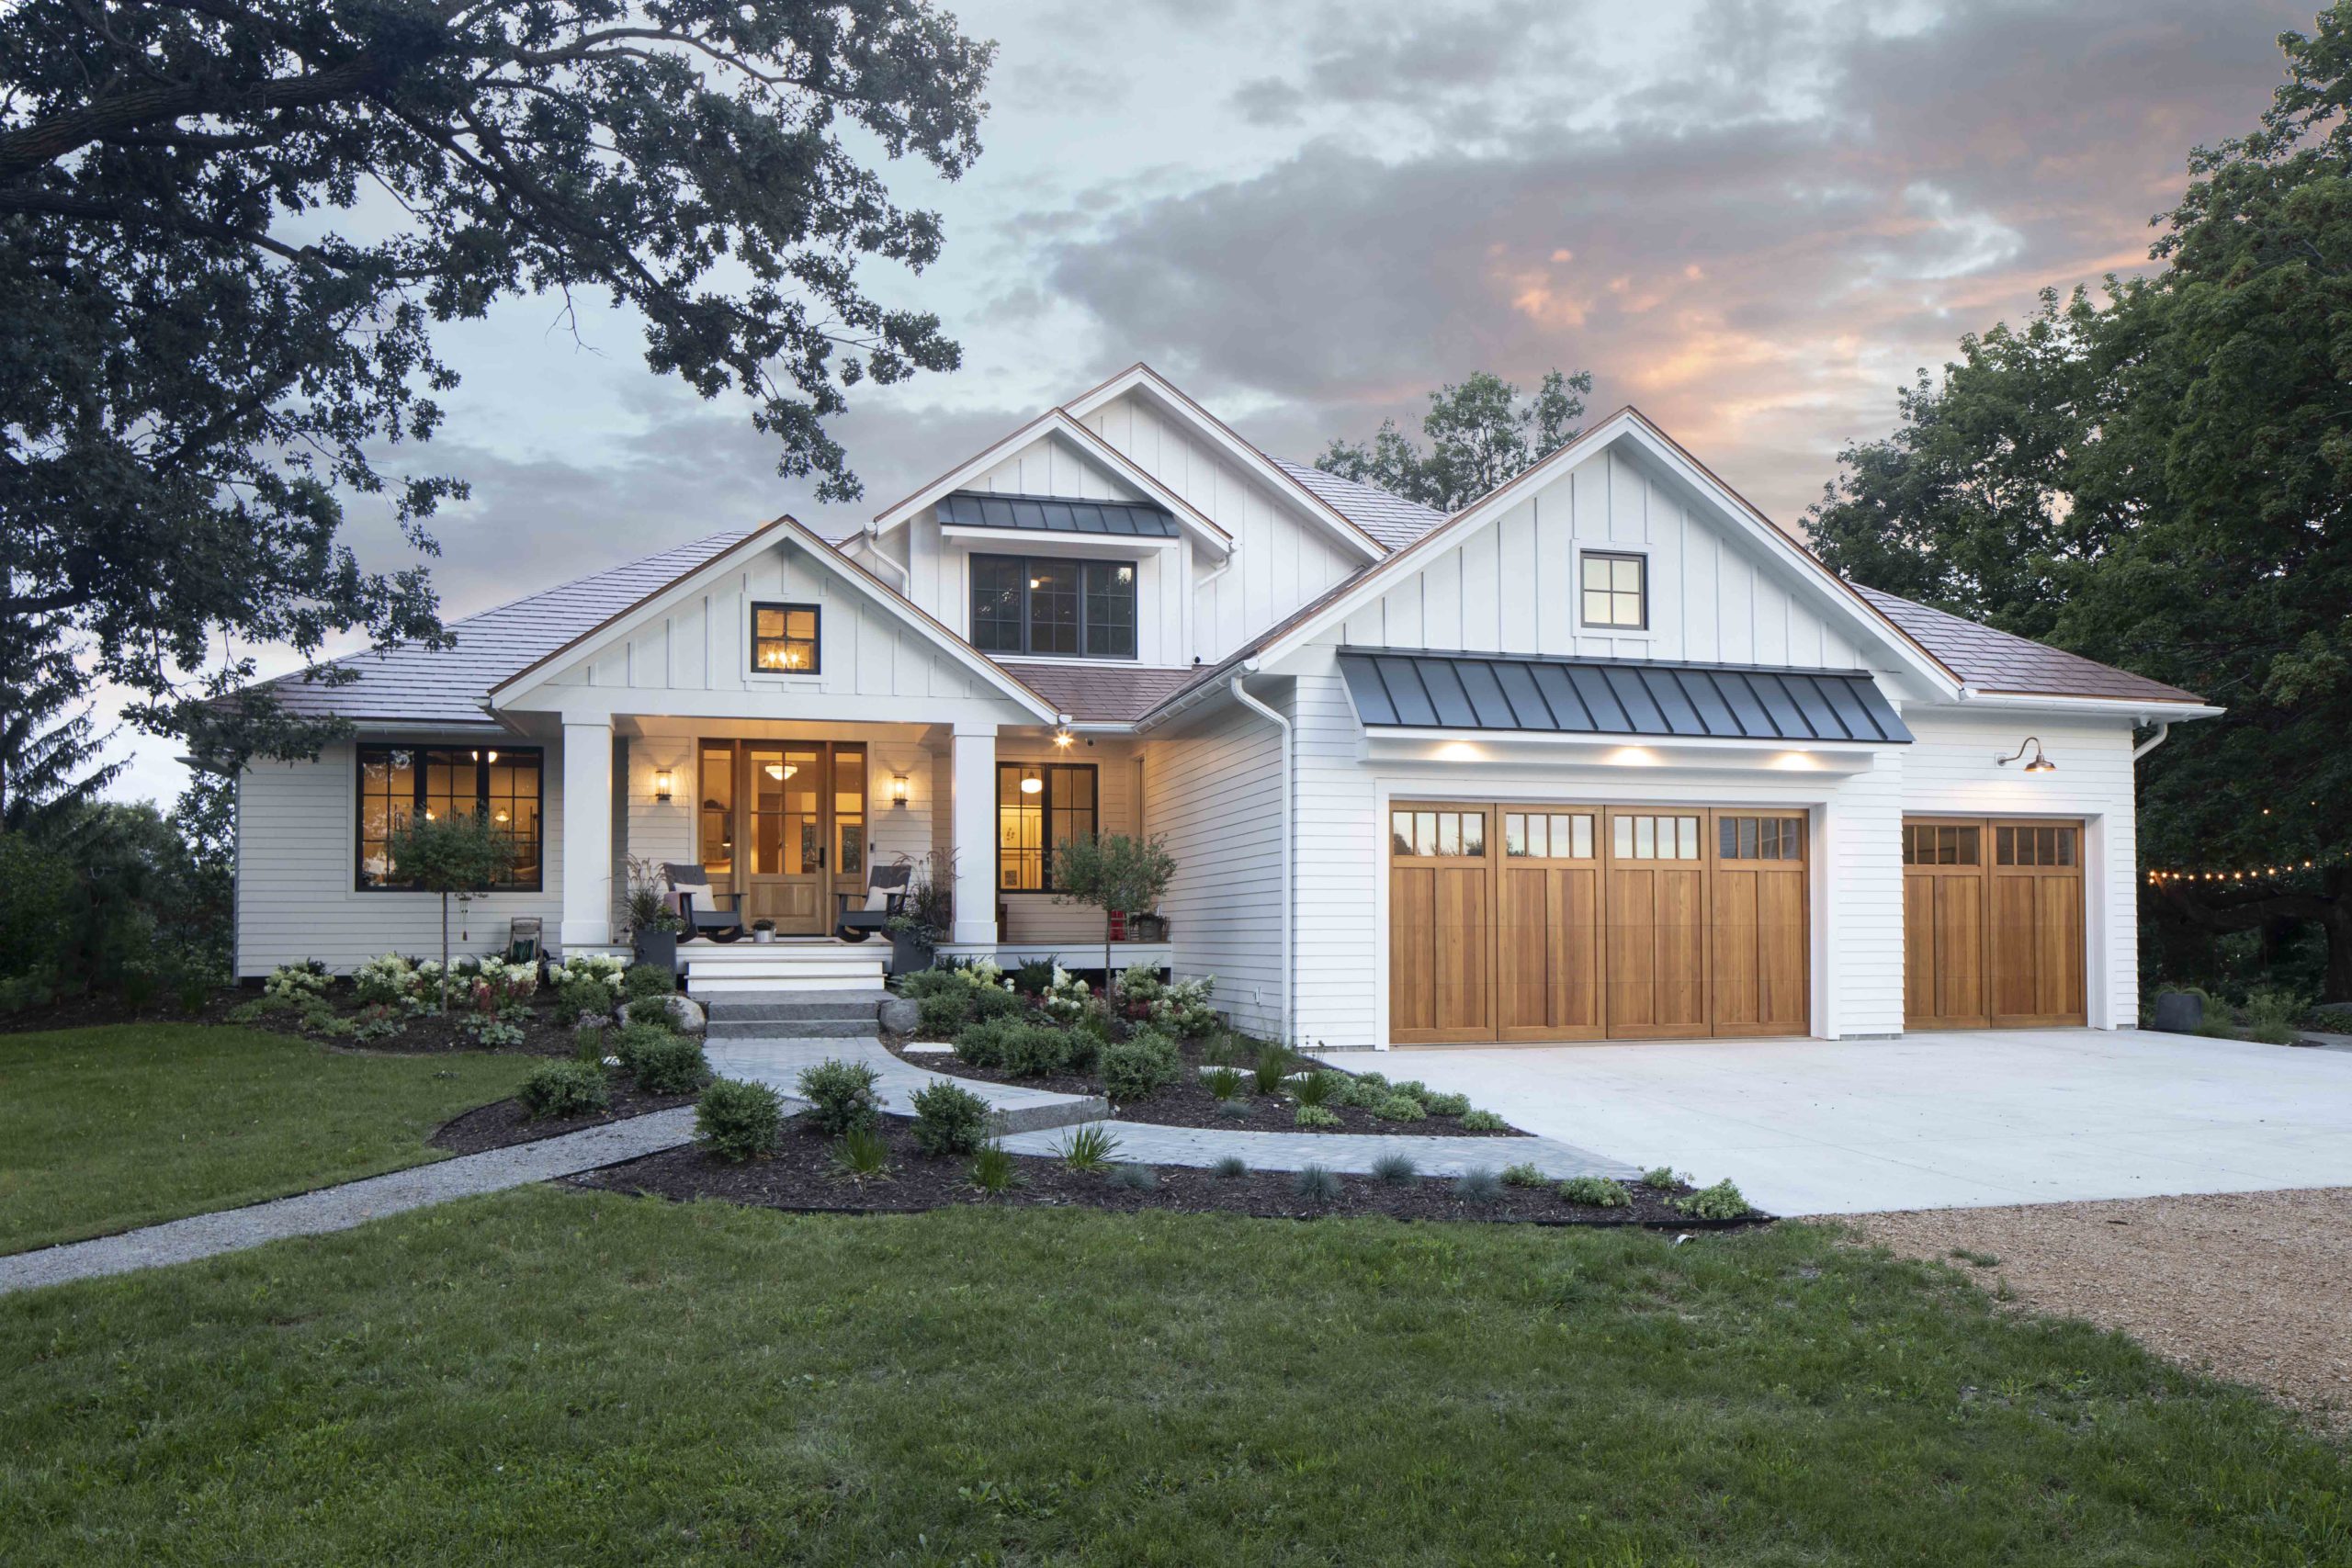 A prairie-style home with a white exterior and large garage.